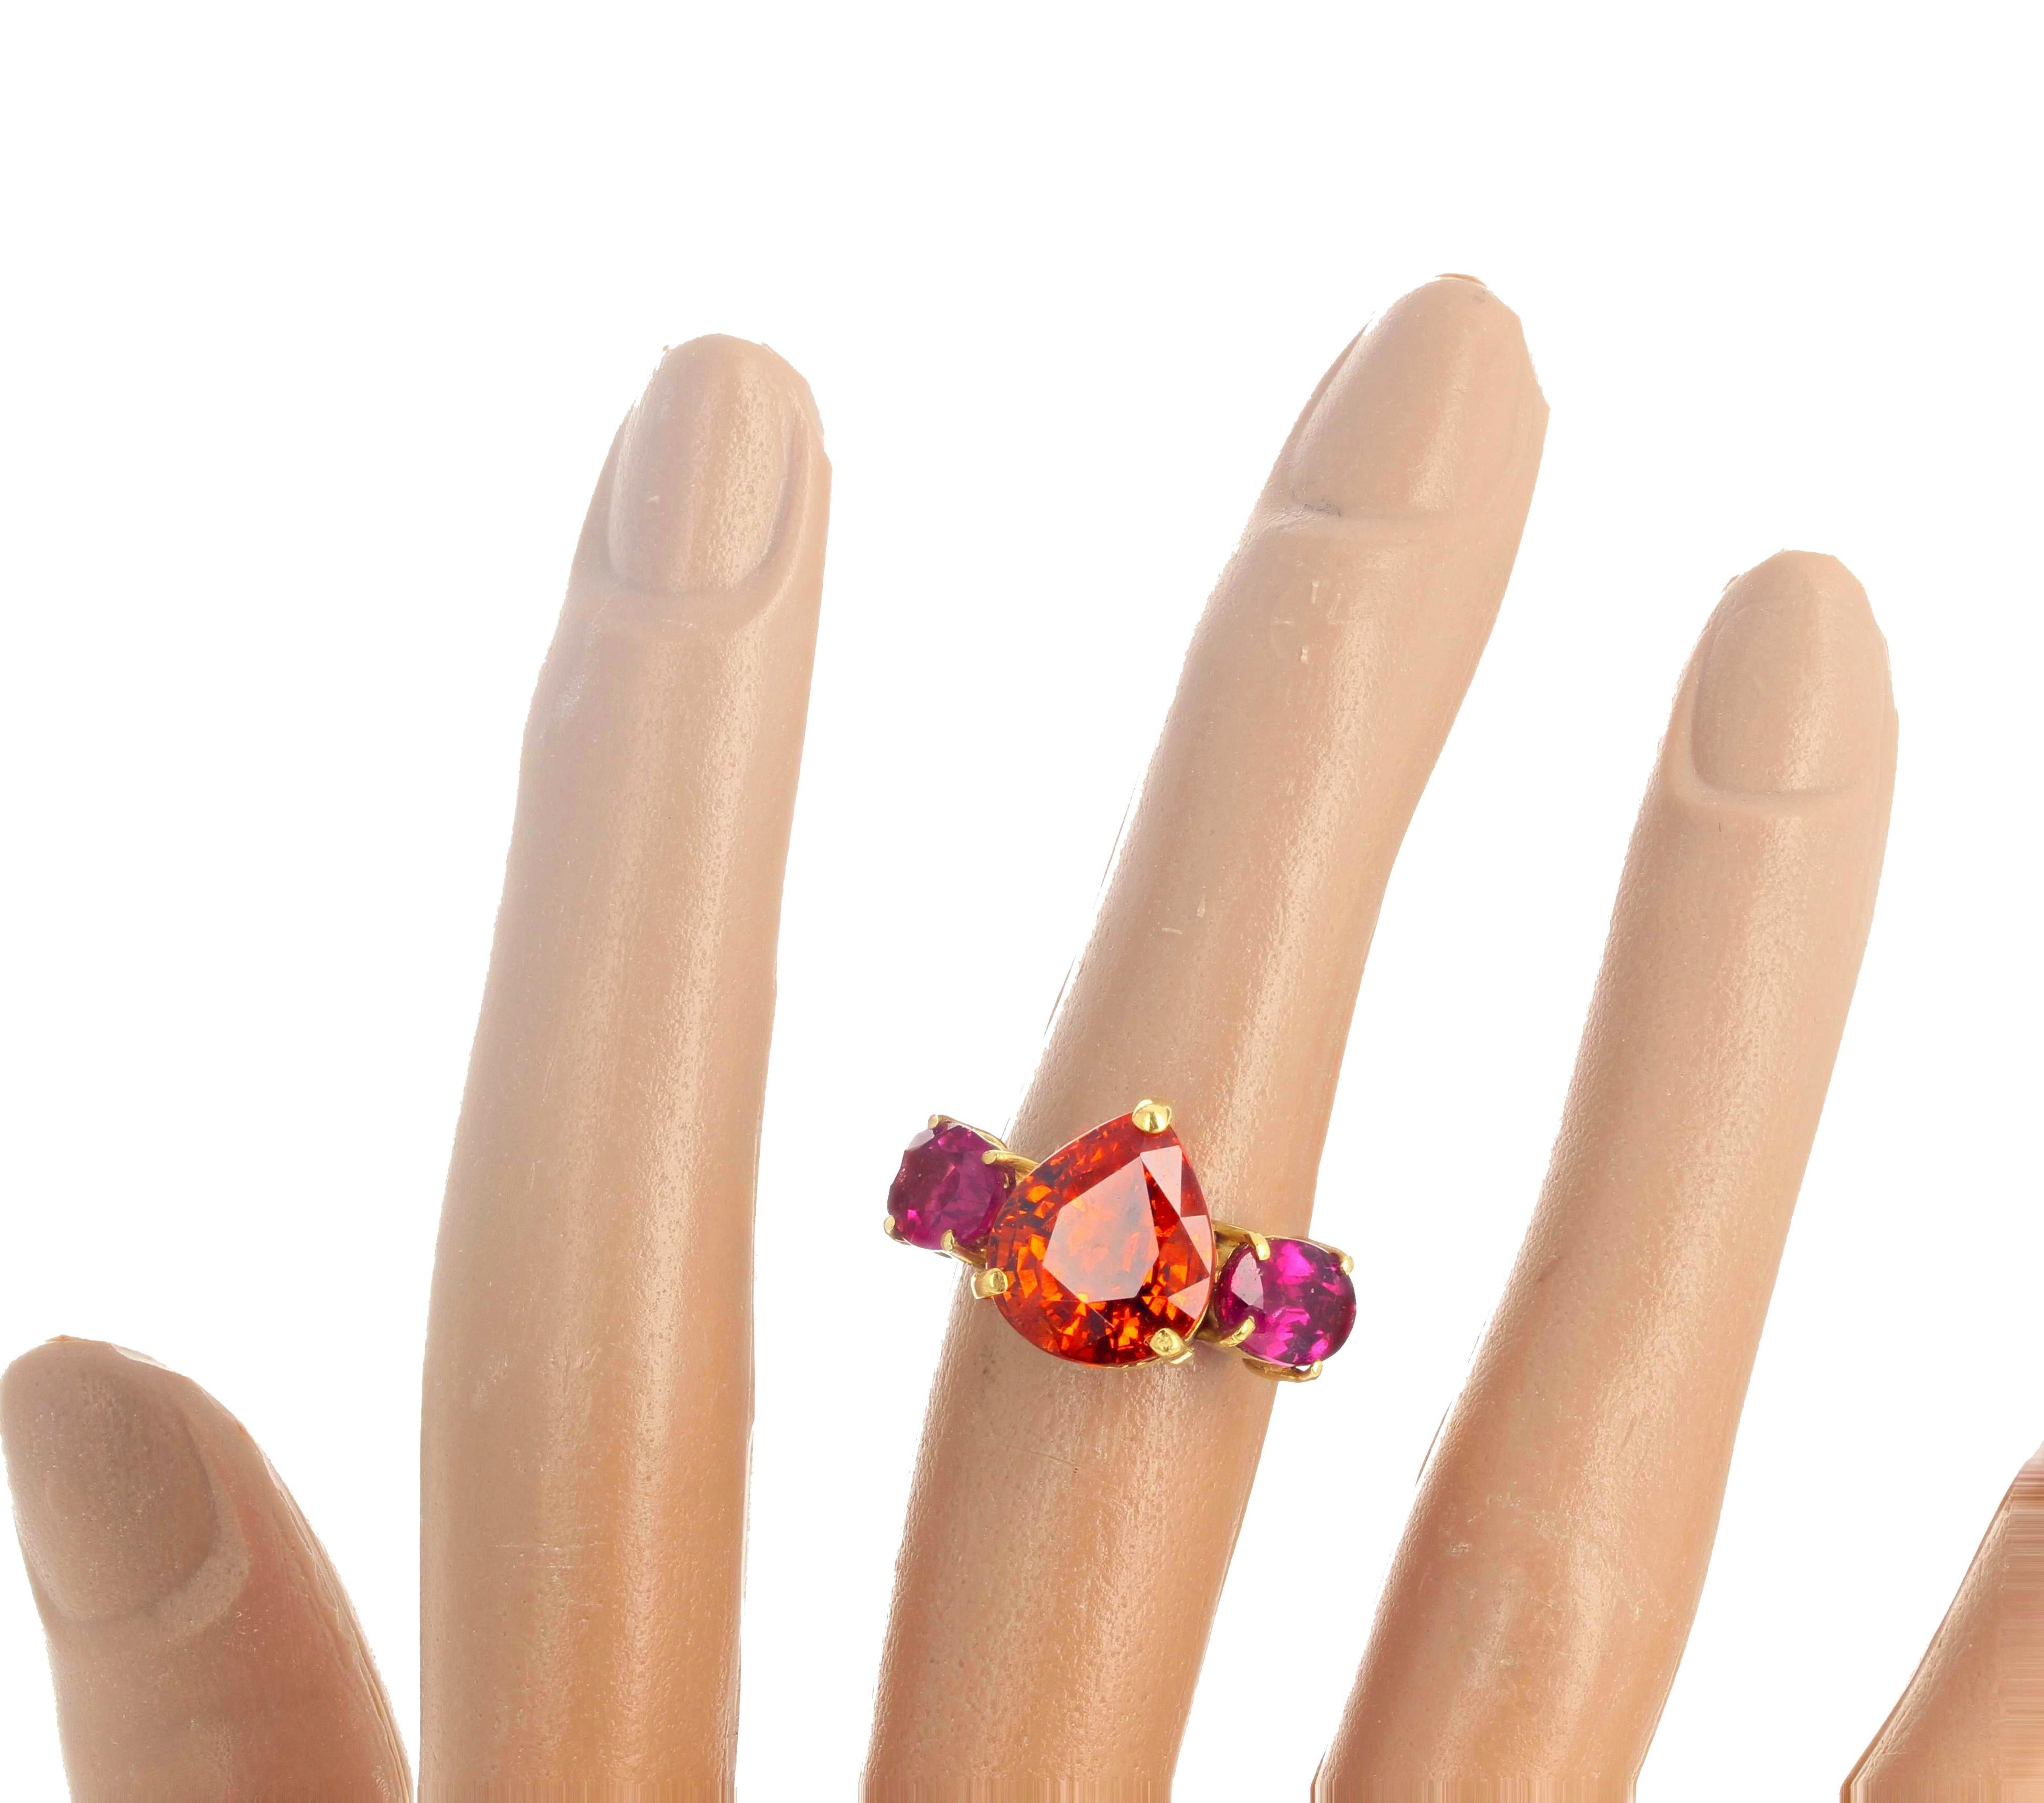 Glittering brilliant natural RARE 7.62 carat Spessartite Garnet (11 mm x 10.4 mm) enhanced with natural glowing pinkyred oval Tourmalines (8 mm x 6 mm) set in the beautiful 18k yellow gold ring size 7 sizable. This is happy to go to dinner and